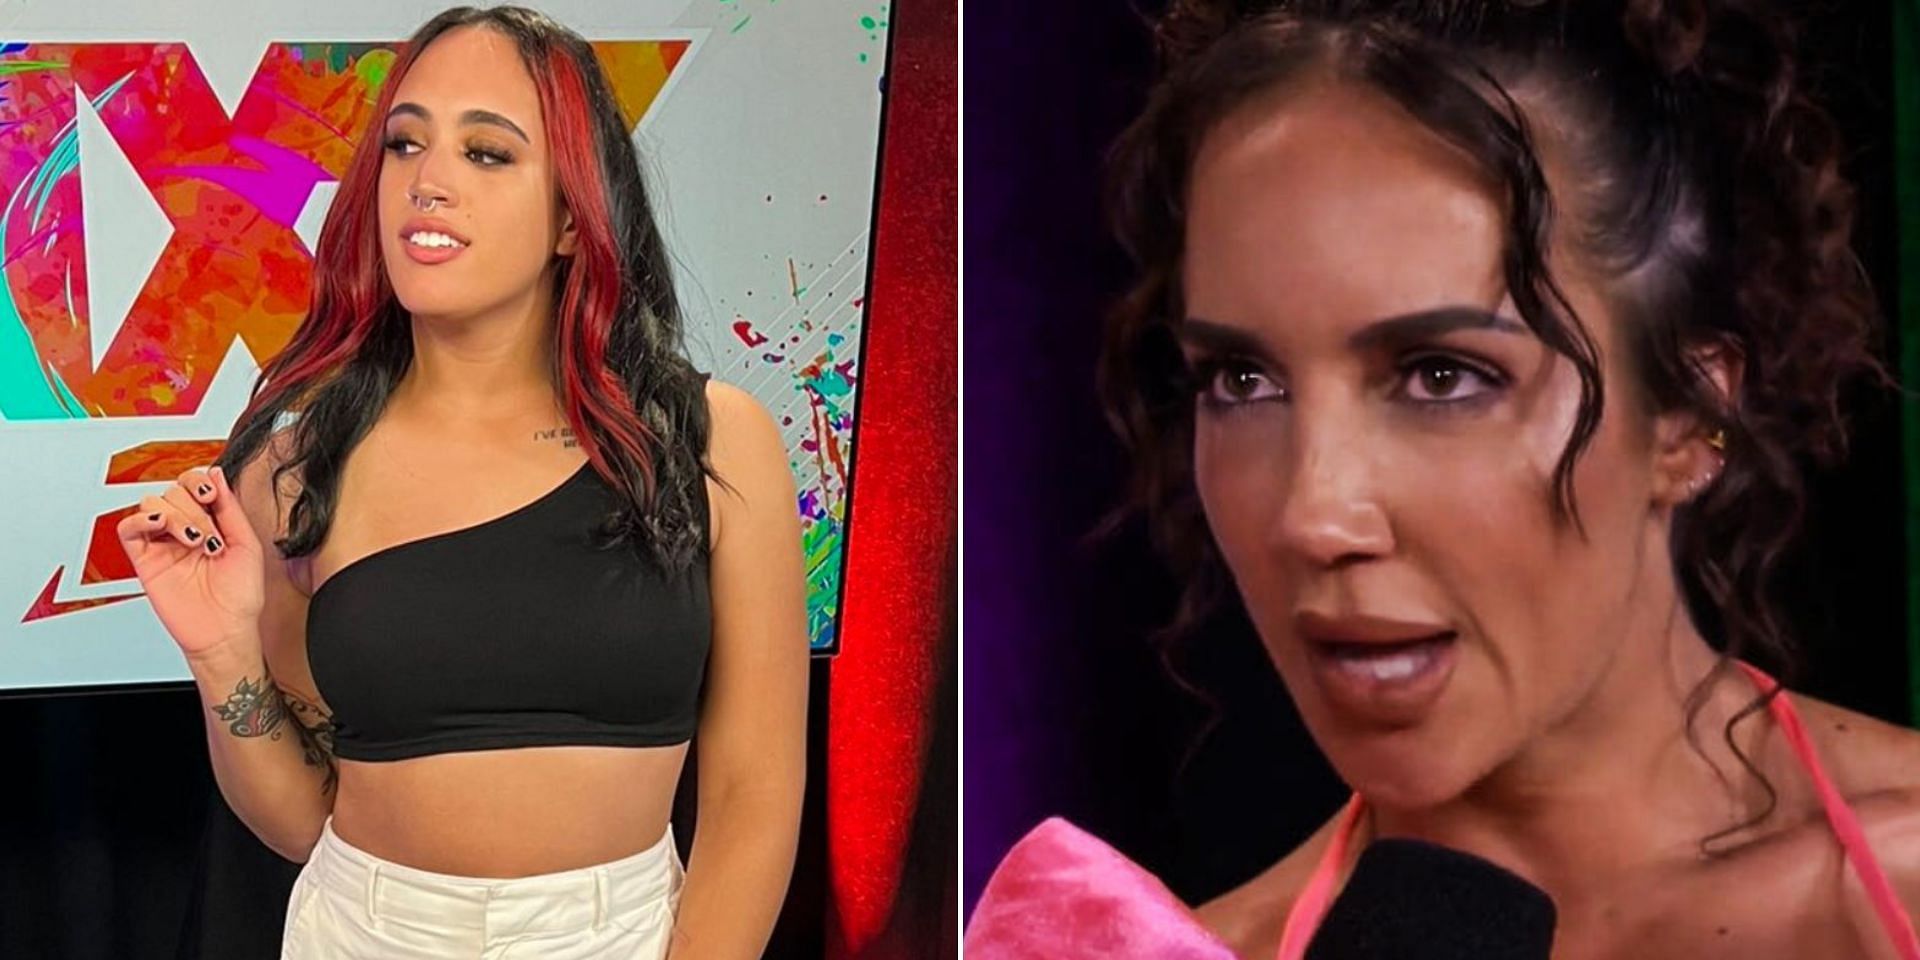 Chelsea Green was offended by WWE